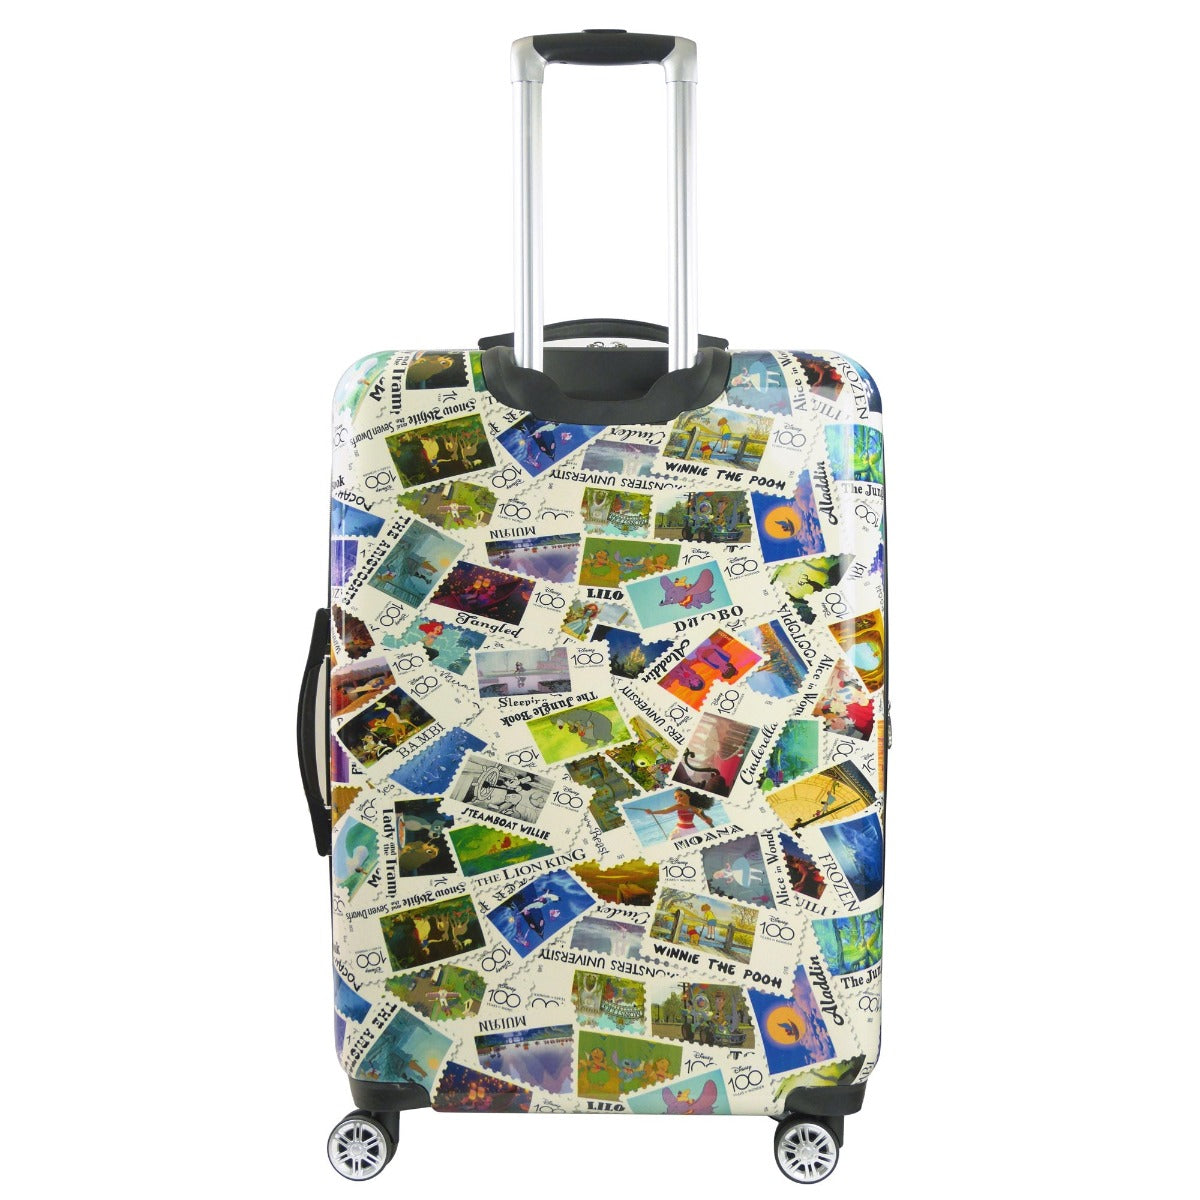 Ful Disney 100 Year Anniversary Stamps Hardsided Spinner Suitcase 30 inch Checked Luggage Retractable Handle 360 degree wheels Interior Limited Edition